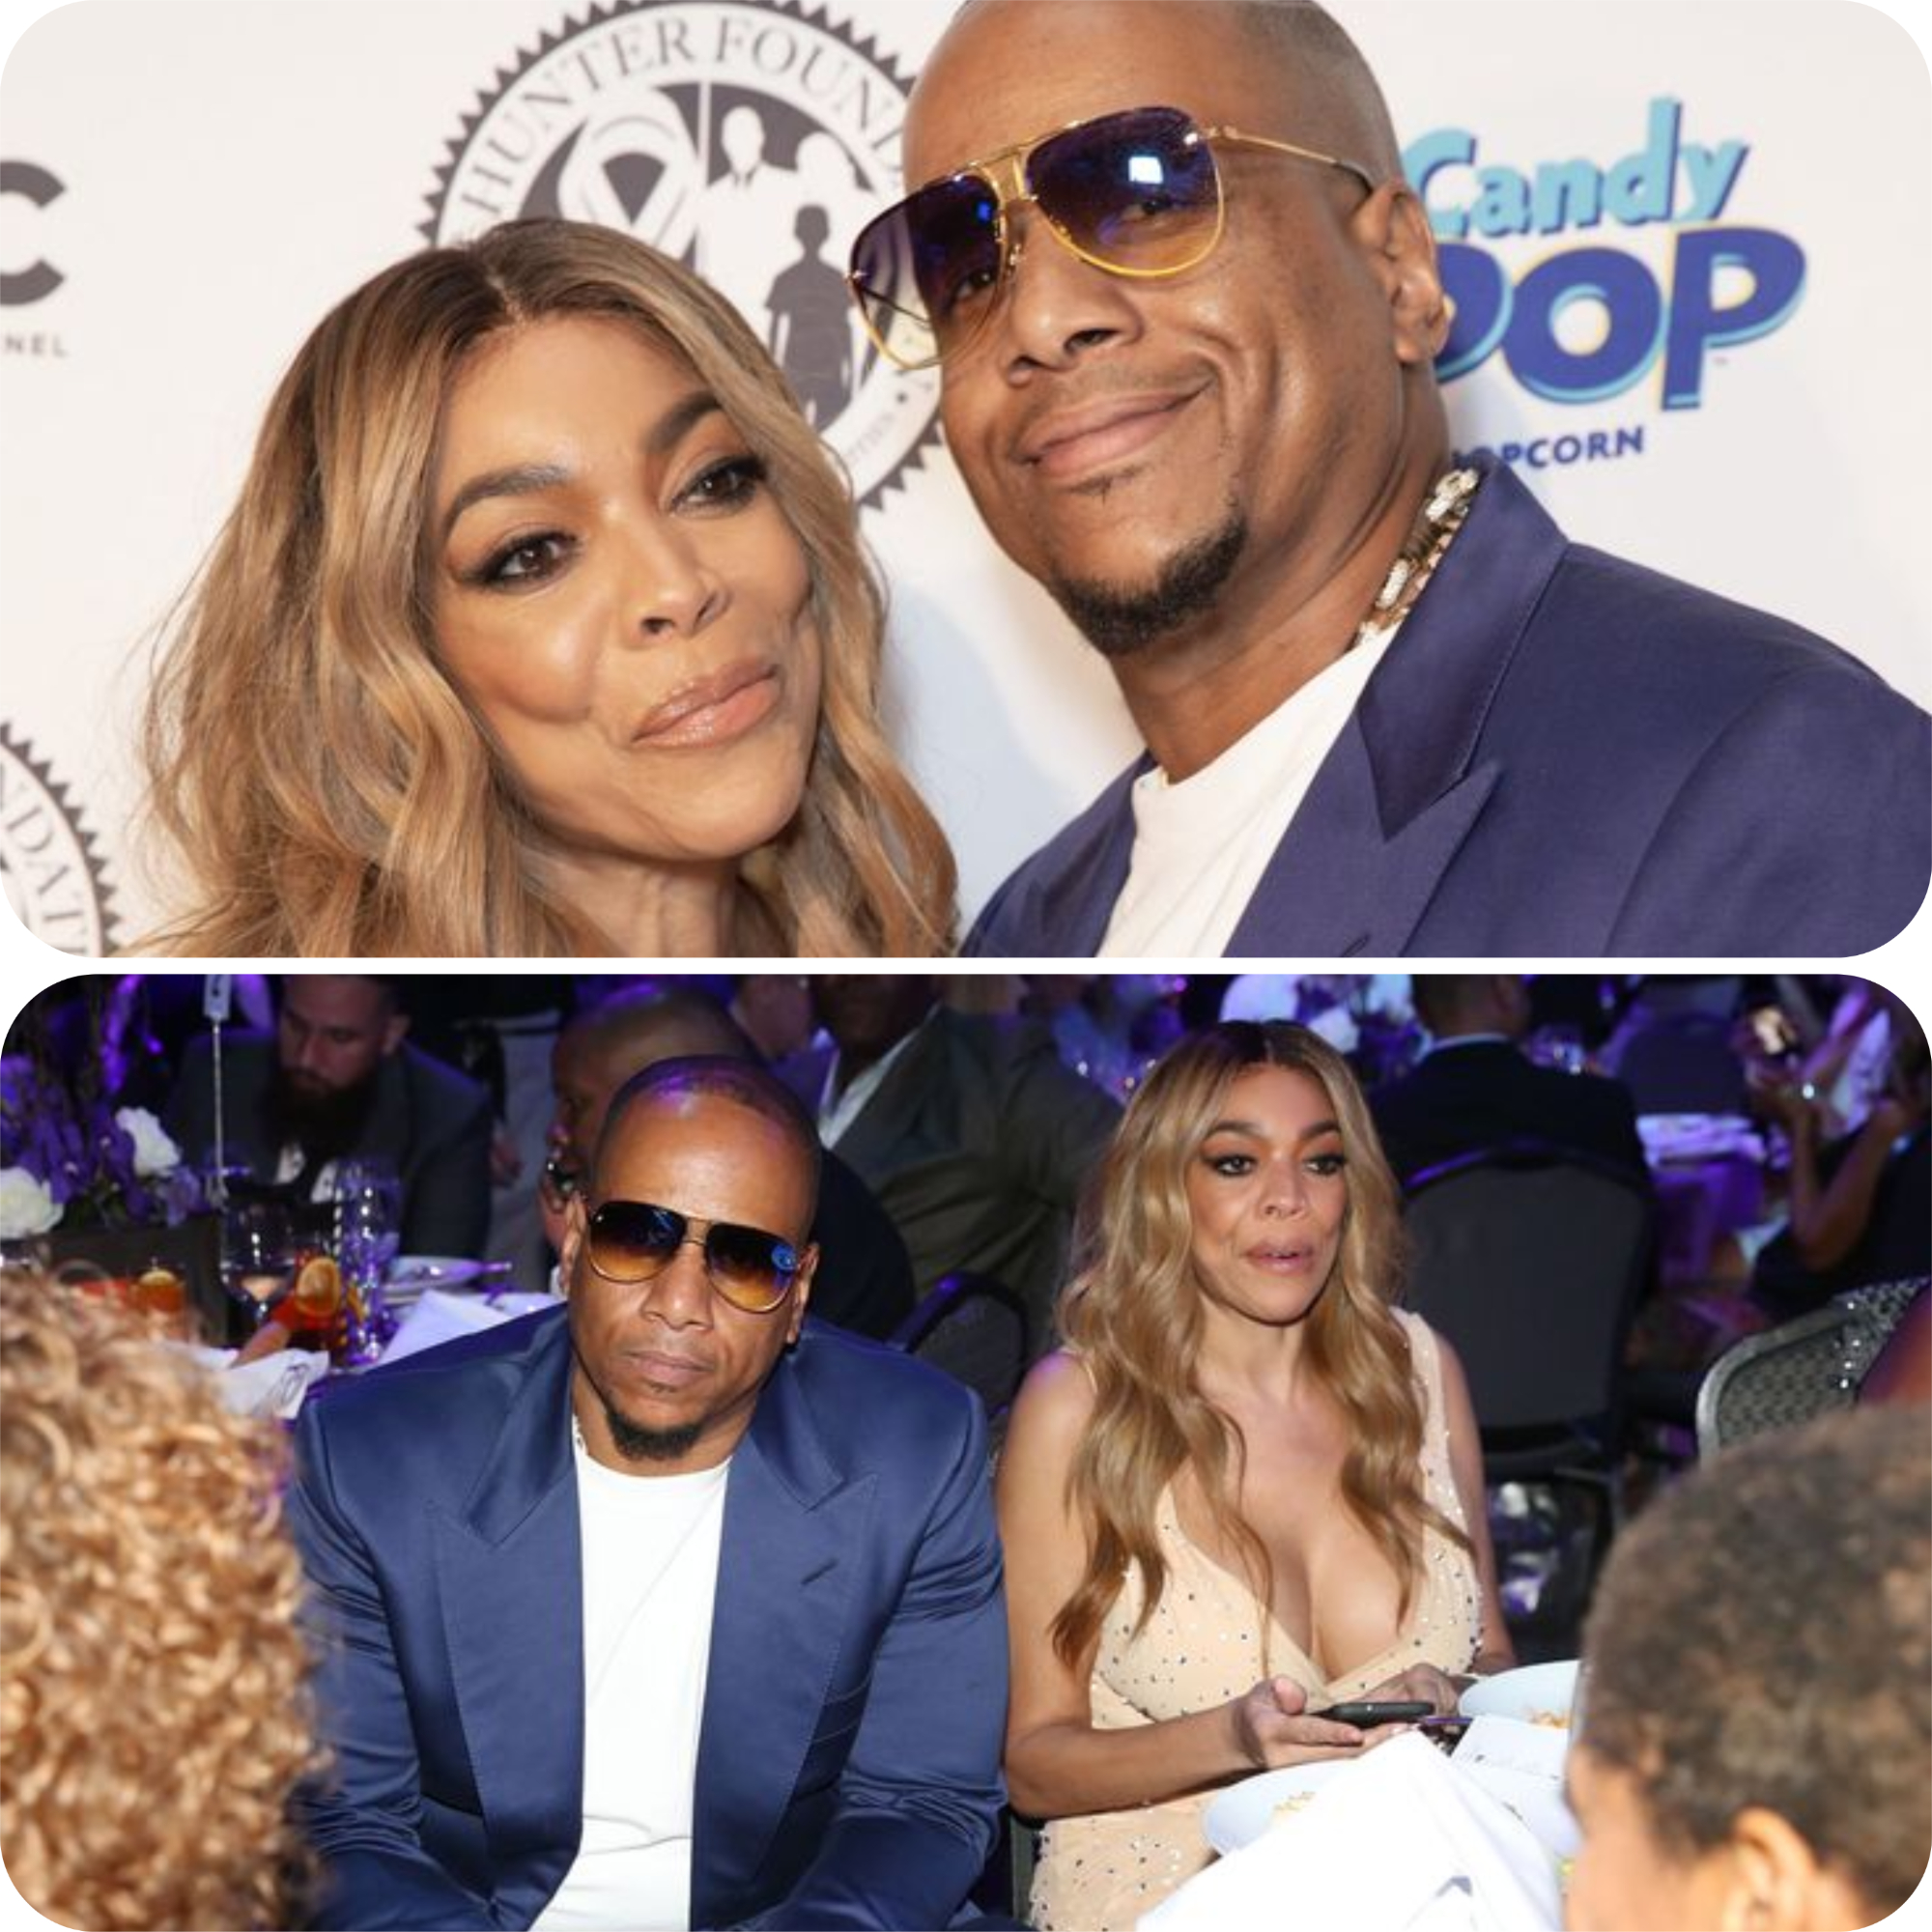 Wendy Williams' ex-husband, Kevin Hunter, is once again making headlines, but this time not for his association with the talk show queen.